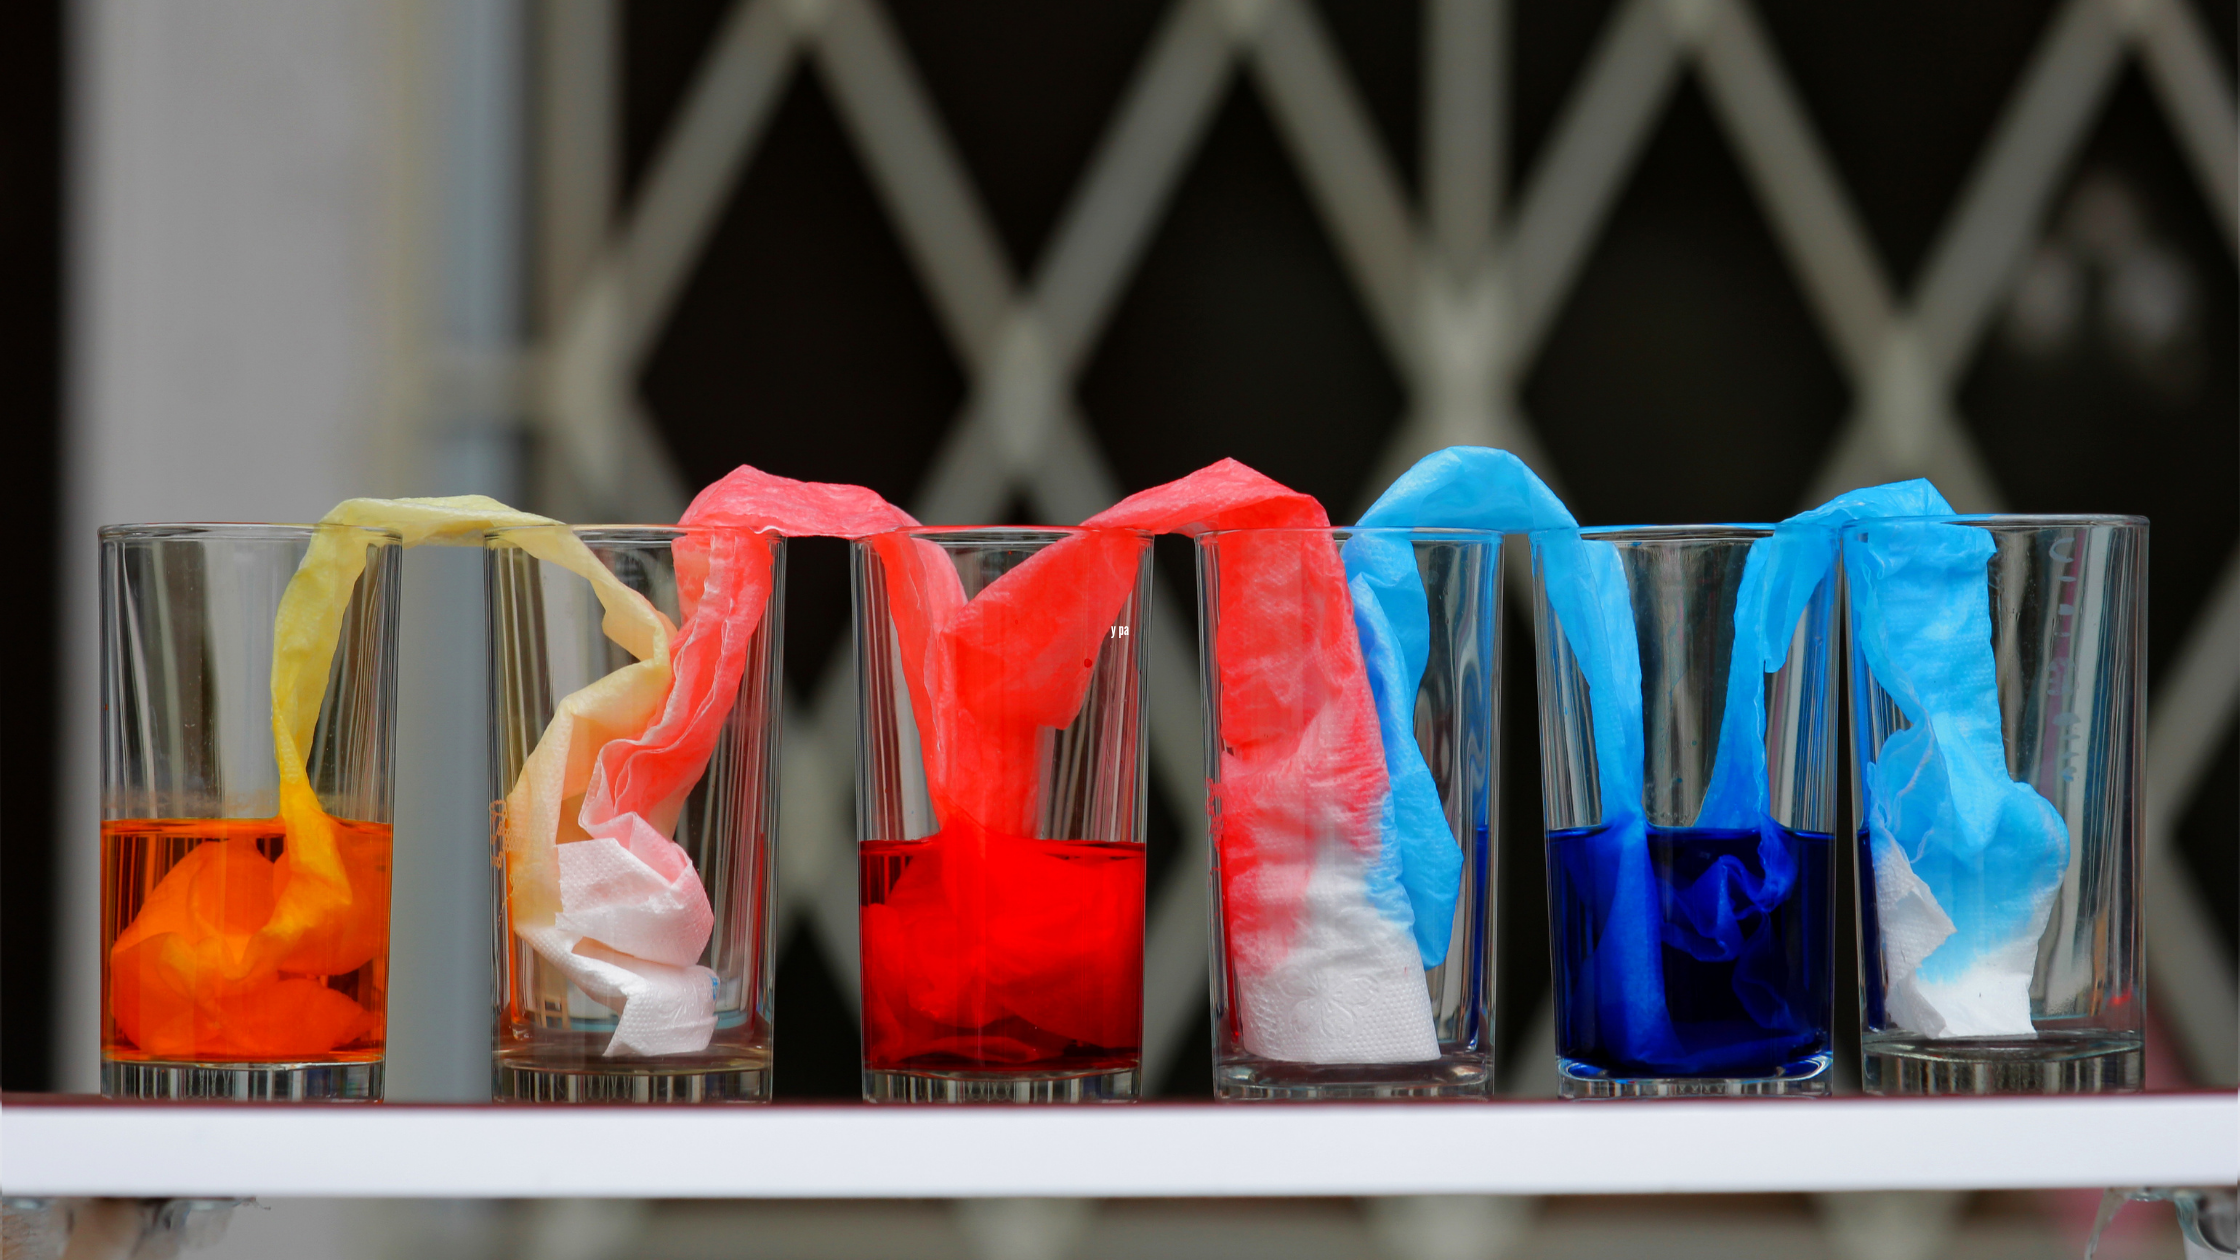 5 Fun & Cool Science Activities with Dye to Do With the Kids 18